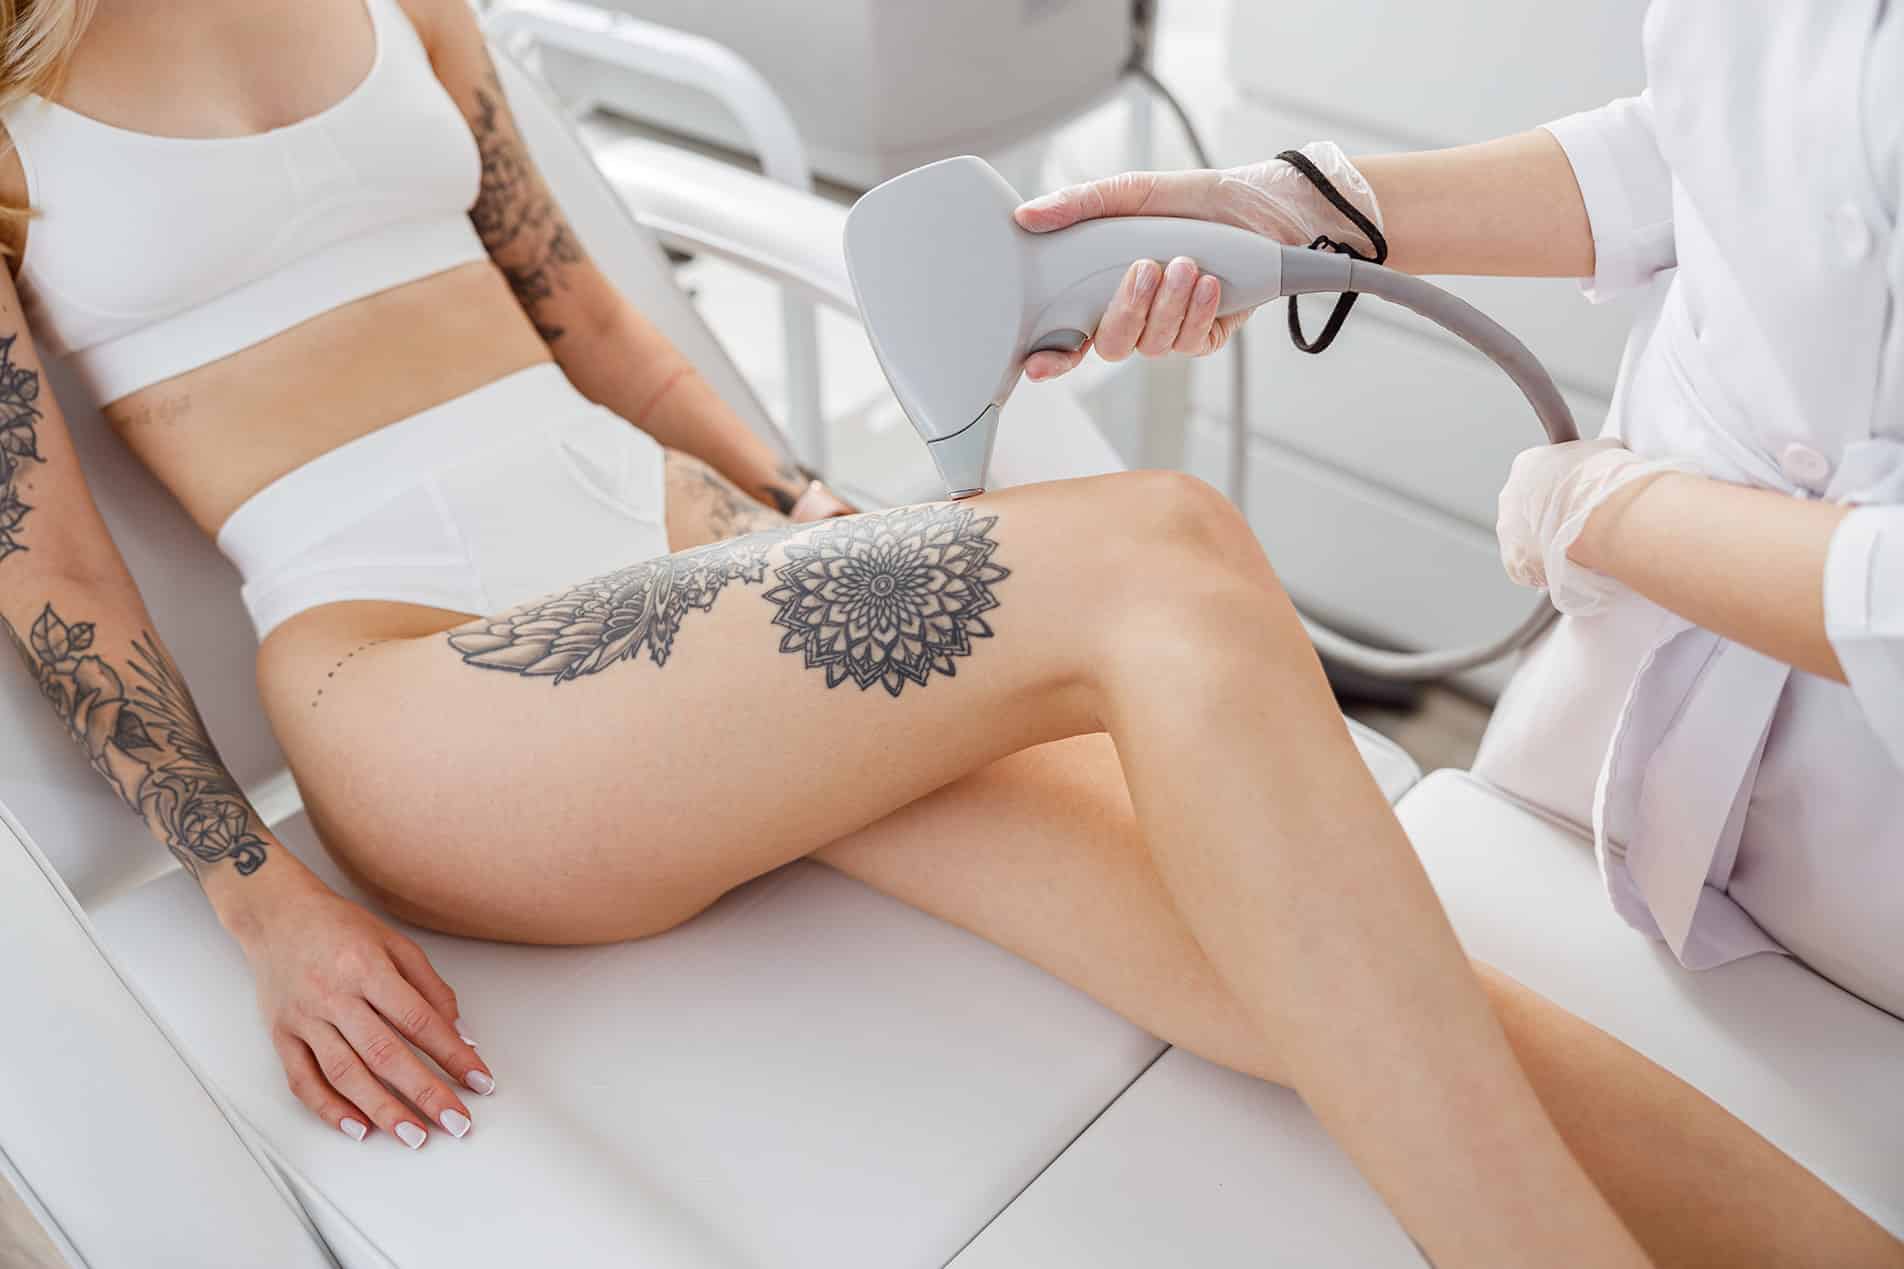 Female beautician performing laser tattoo removal.